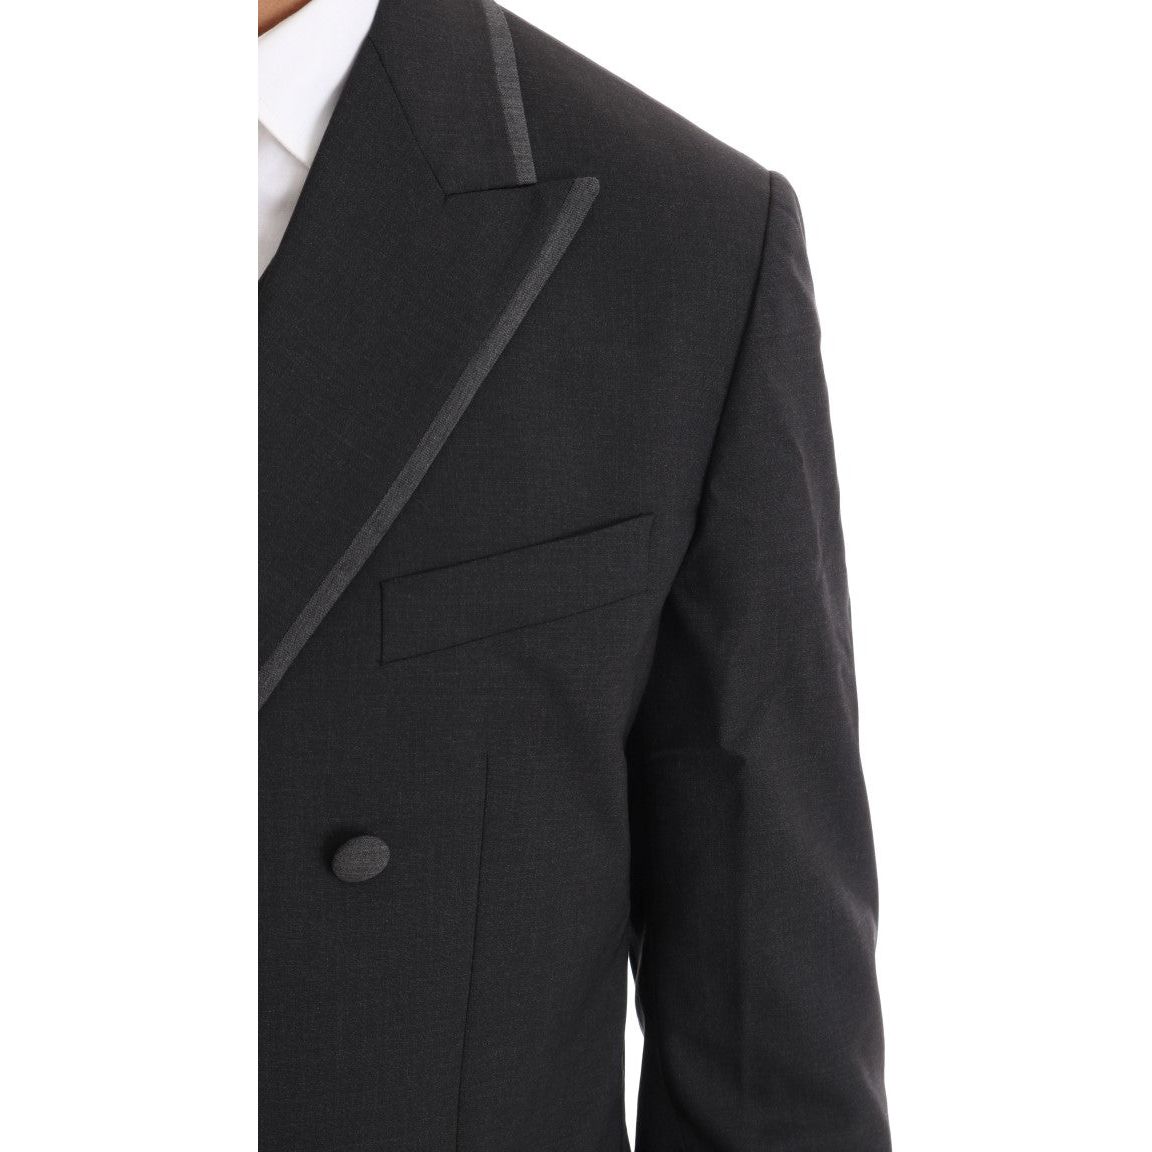 Dolce & Gabbana Elegant Gray Double Breasted Wool Suit Suit gray-wool-stretch-3-piece-two-button-suit-1